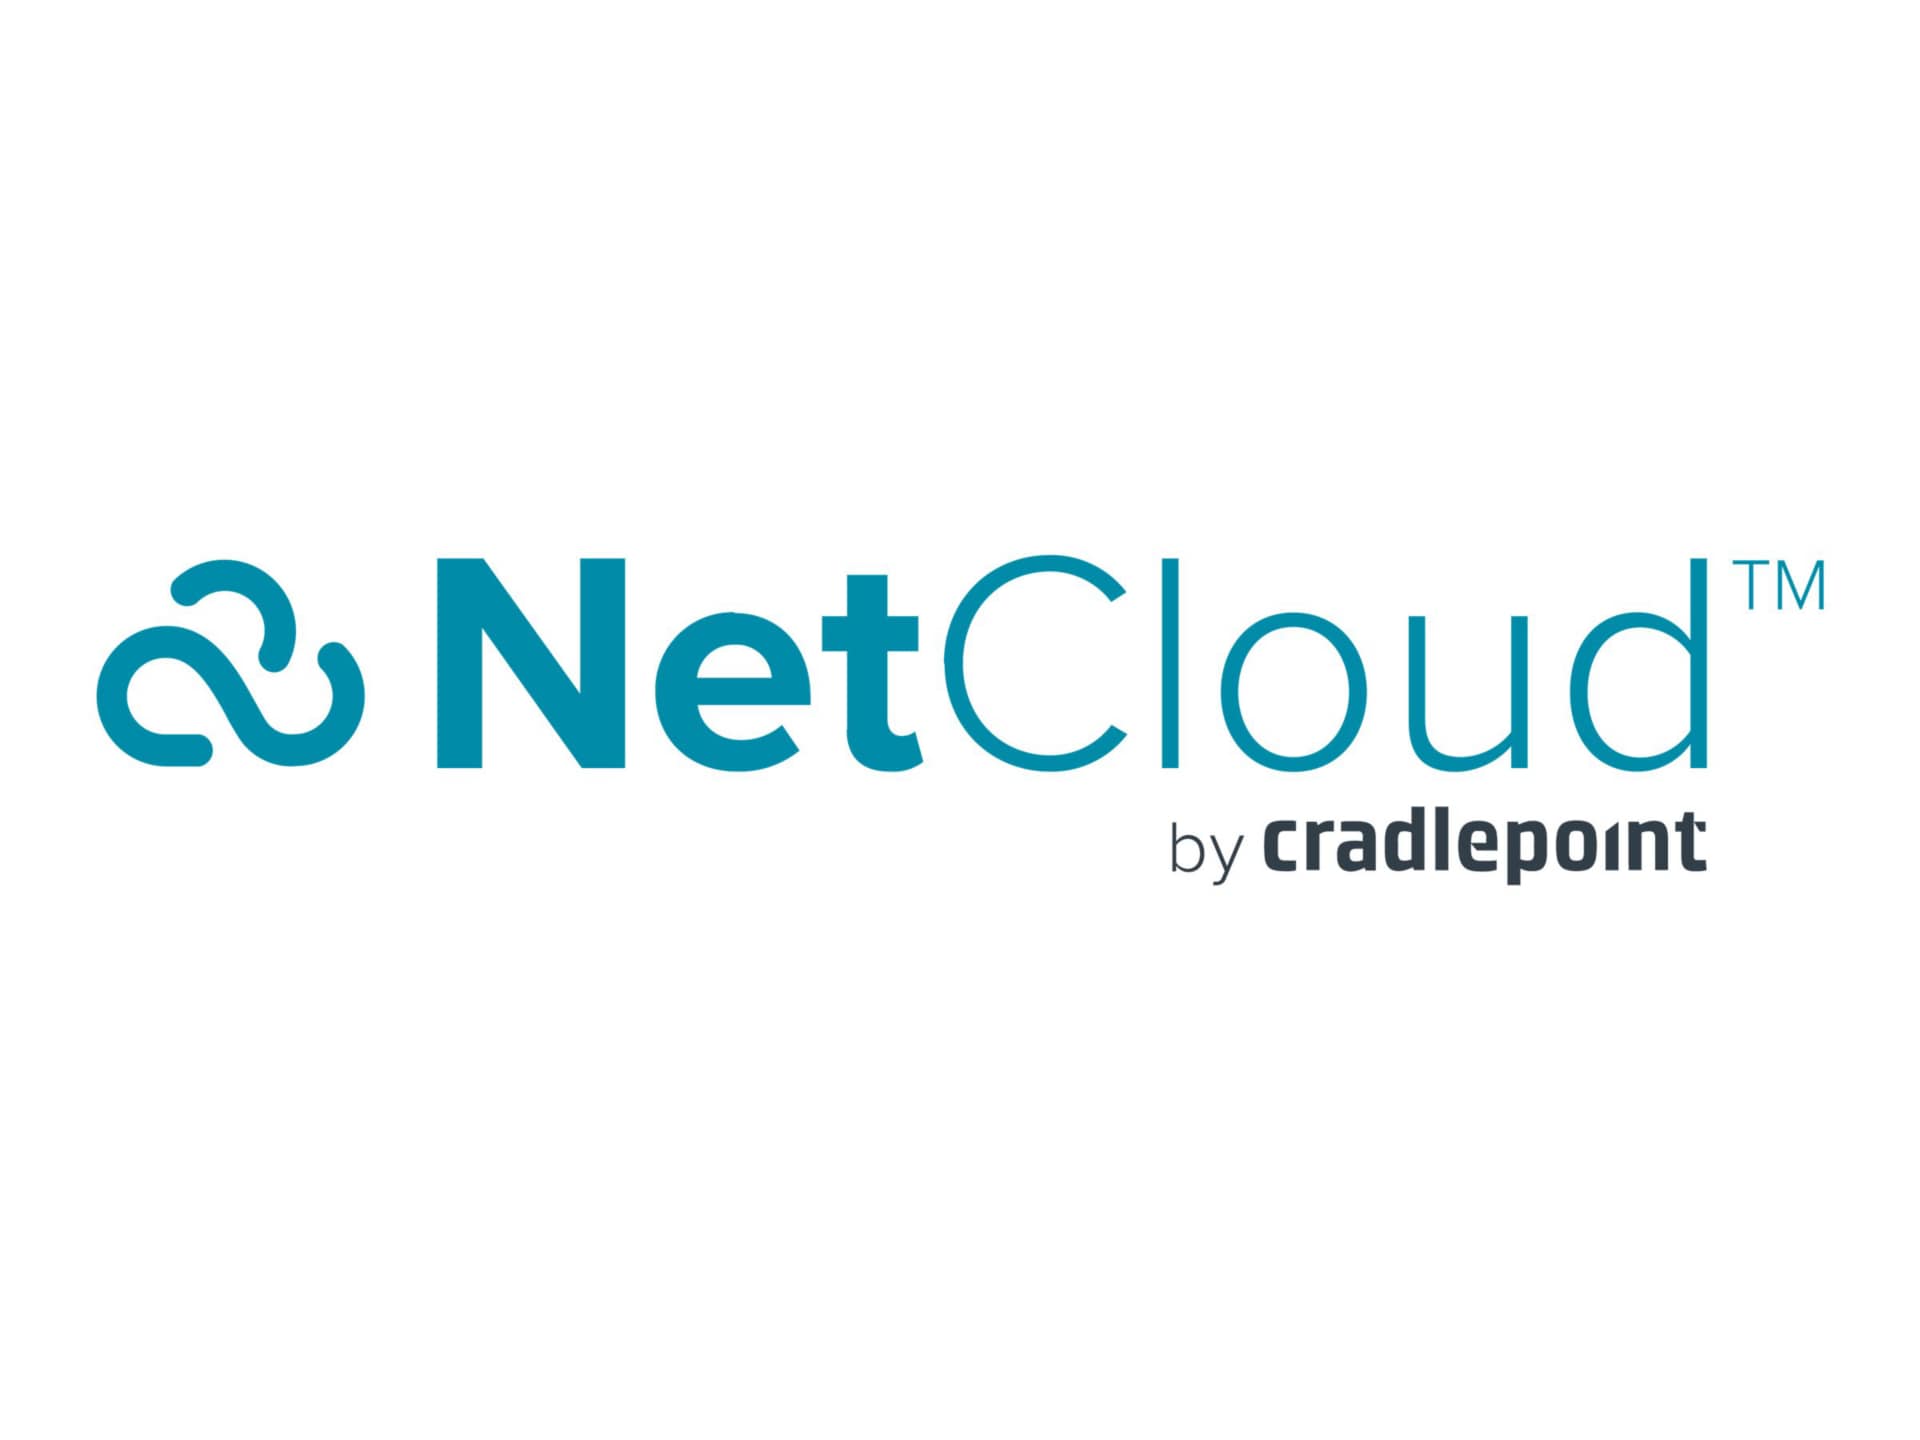 Cradlepoint NetCloud Advanced for IoT Routers (Prime) - subscription license renewal (1 year) - 1 license